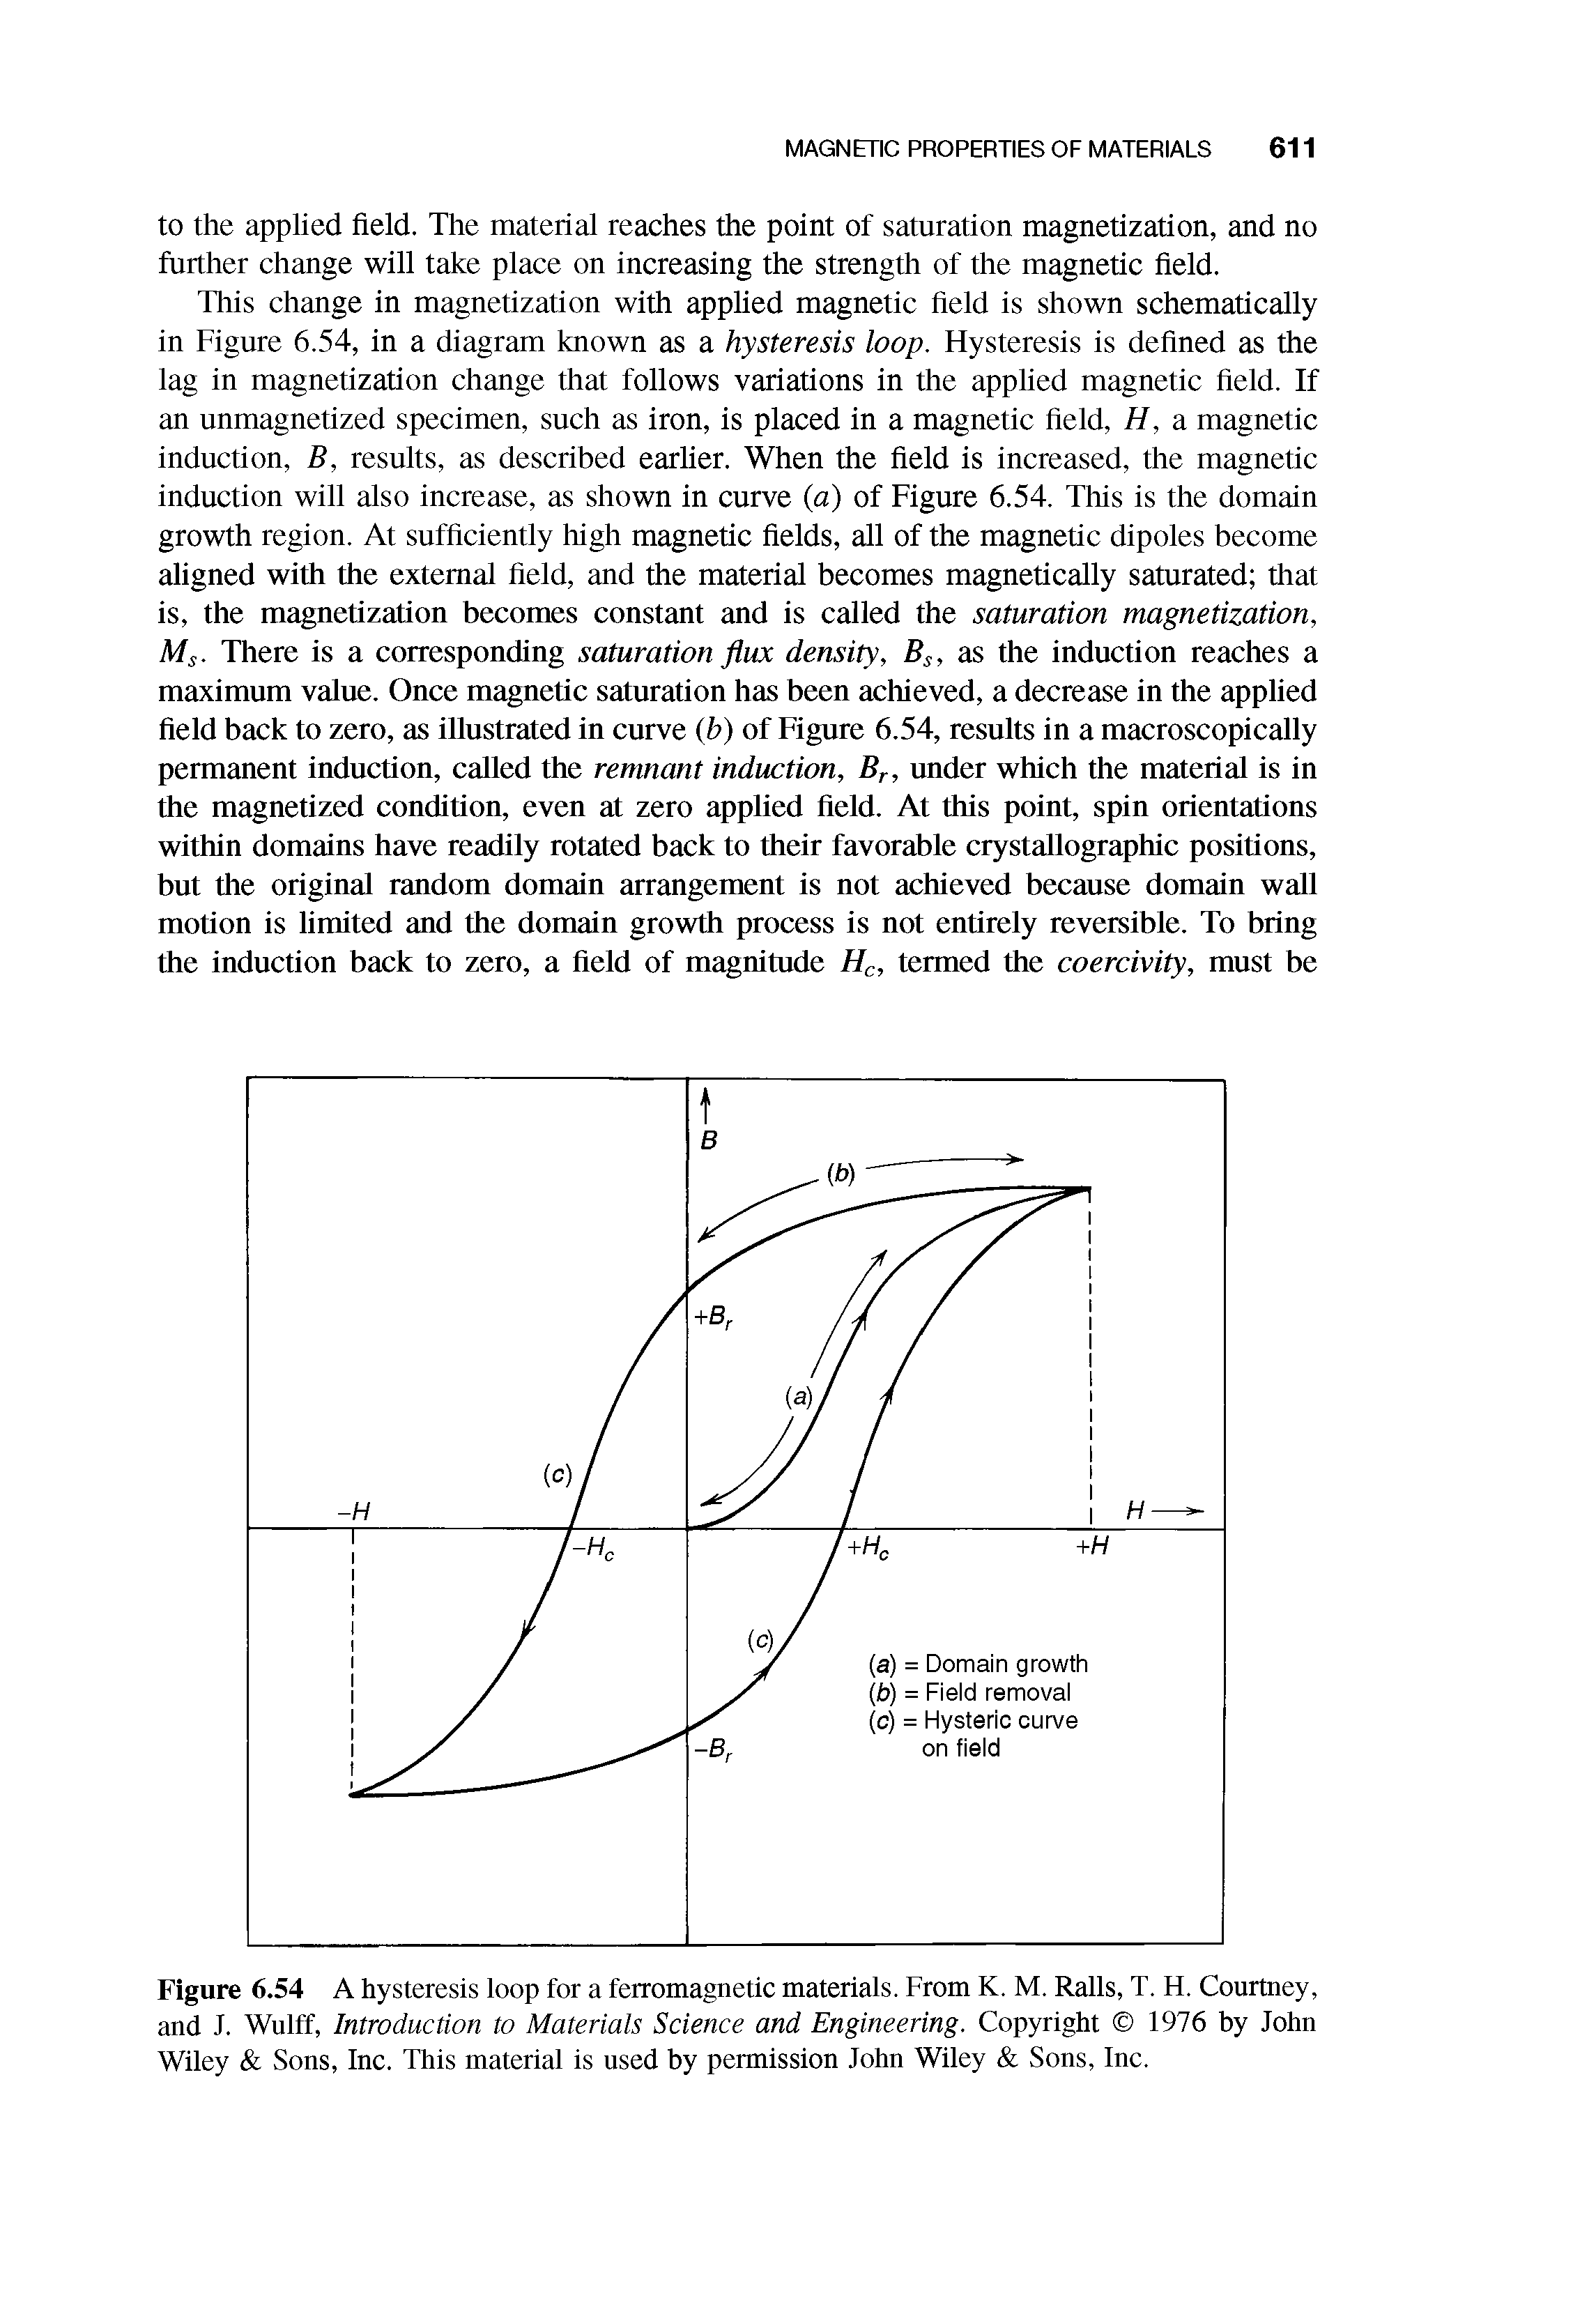 Figure 6.54 A hysteresis loop for a ferromagnetic materials. From K. M. Ralls, T. H. Courtney, and J. Wulff, Introduction to Materials Science and Engineering. Copyright 1976 by John Wiley Sons, Inc. This material is used by permission John Wiley Sons, Inc.